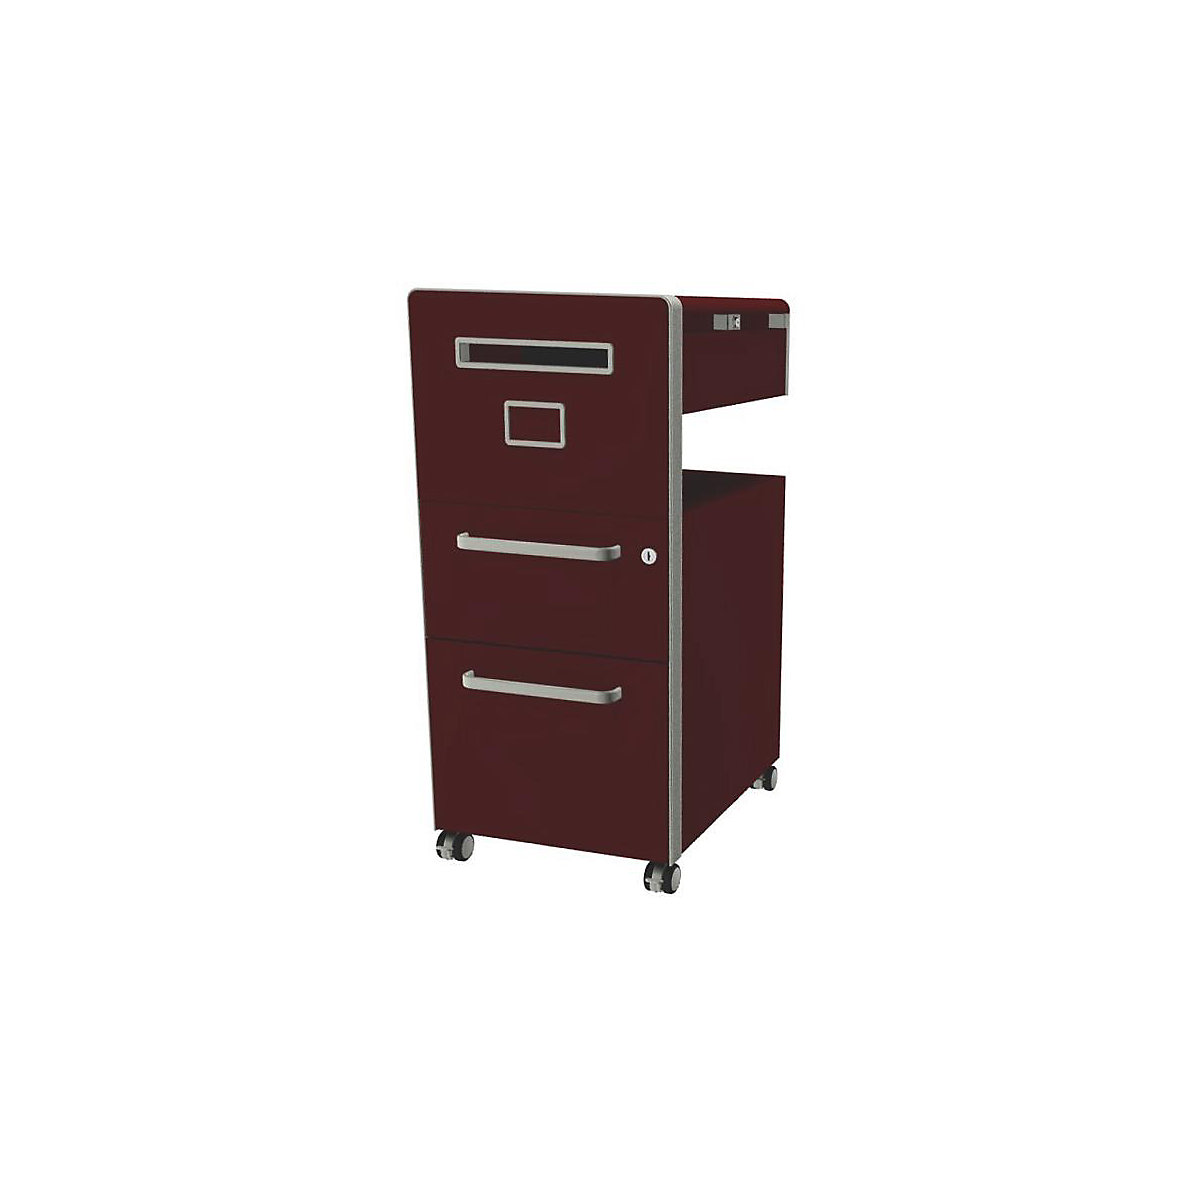 Bite™ pedestal furniture, with 1 pin board, opens on the left side – BISLEY, with 1 universal drawer, 1 suspension file drawer, sepia brown-24